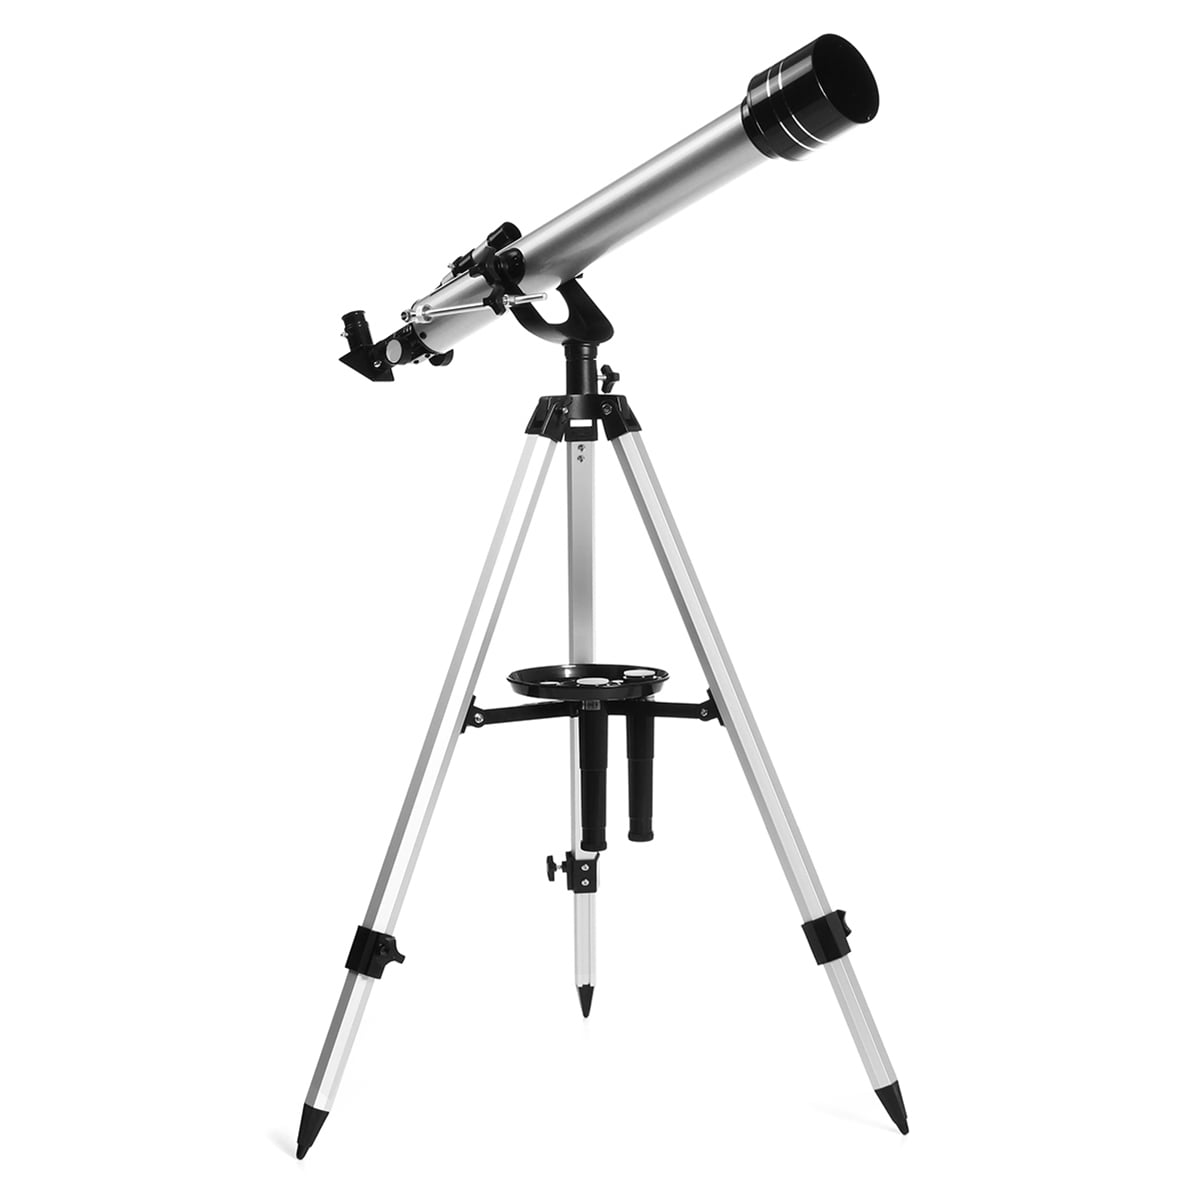 JHLD Telescope 70mm Aperture Astronomy Refractor Telescope with Tripod for Adult Children-30070 